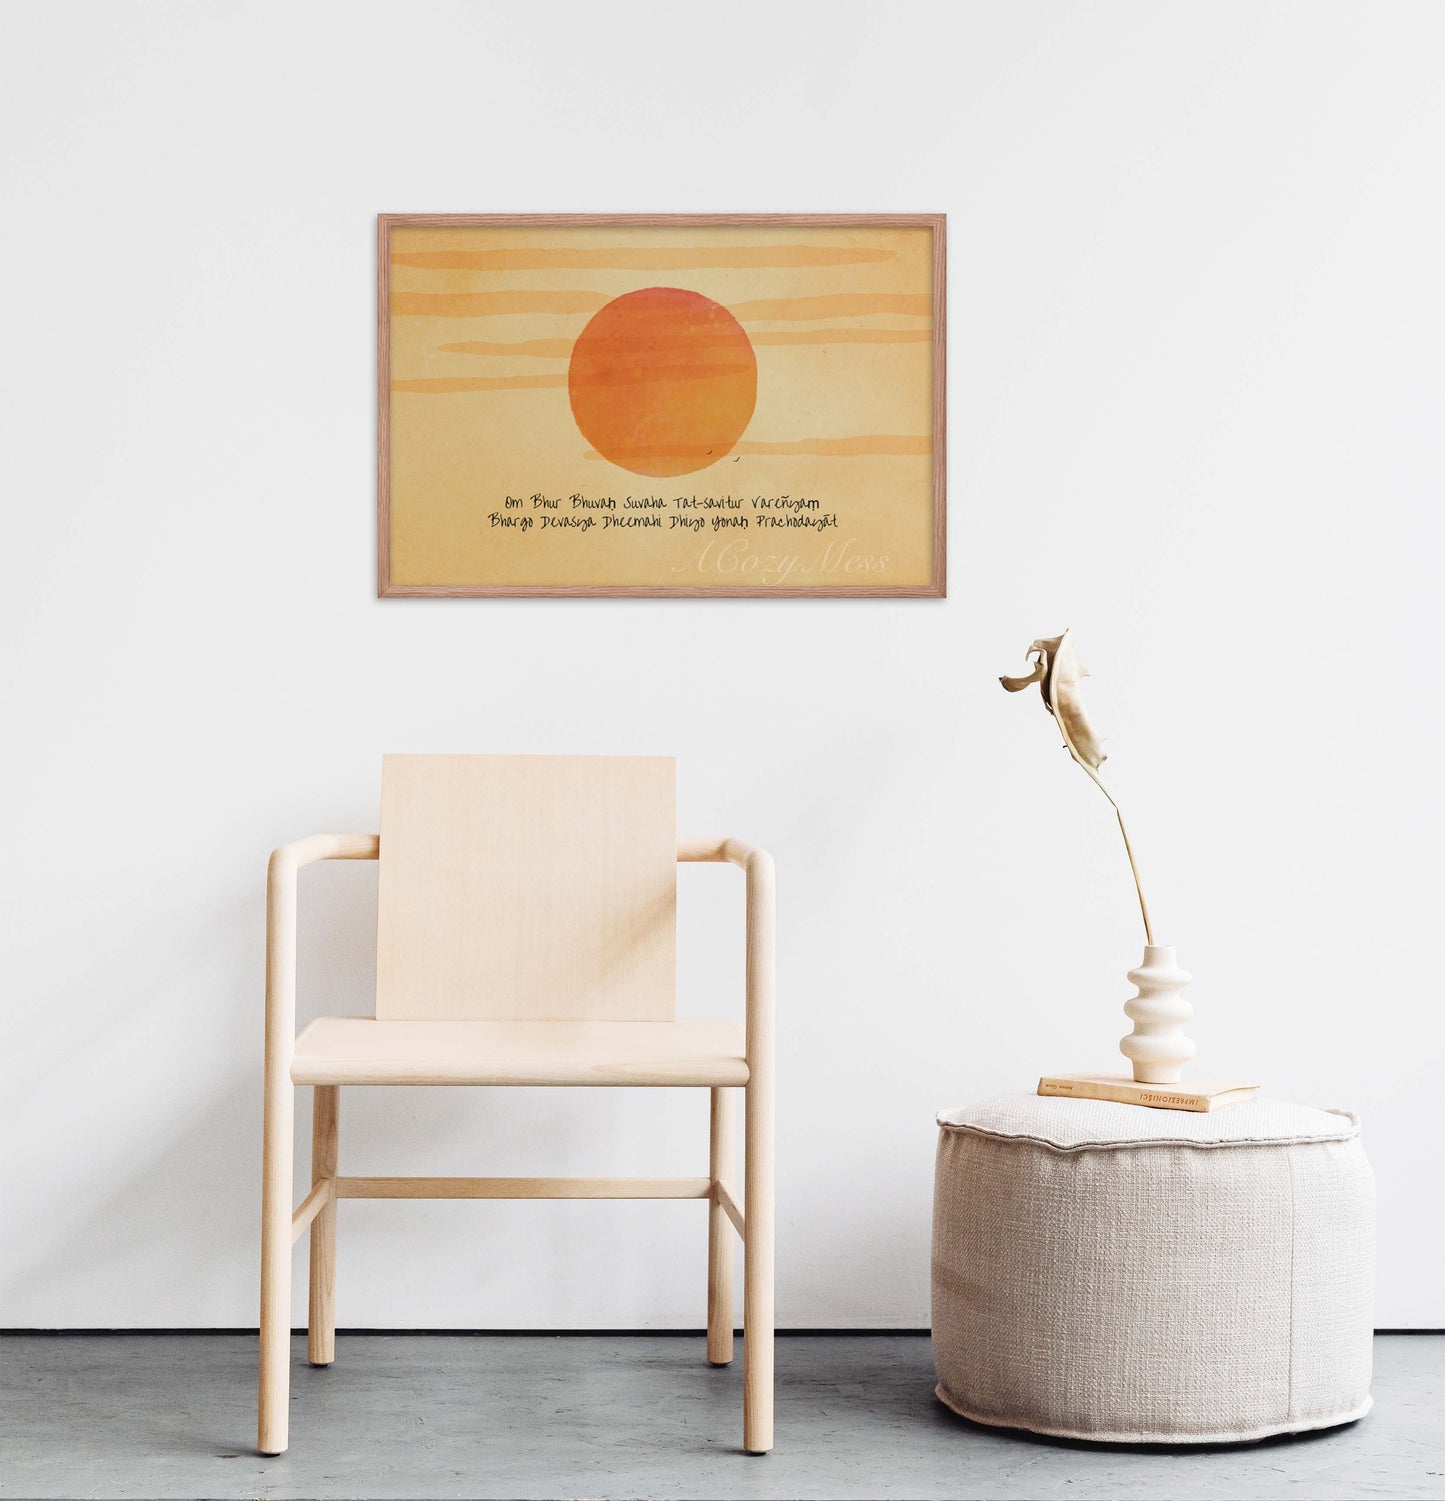 A wall art print featuring the Gayatri Mantra overlaid on a radiant sunburst, creating a spiritually uplifting and visually captivating artwork in oak frame